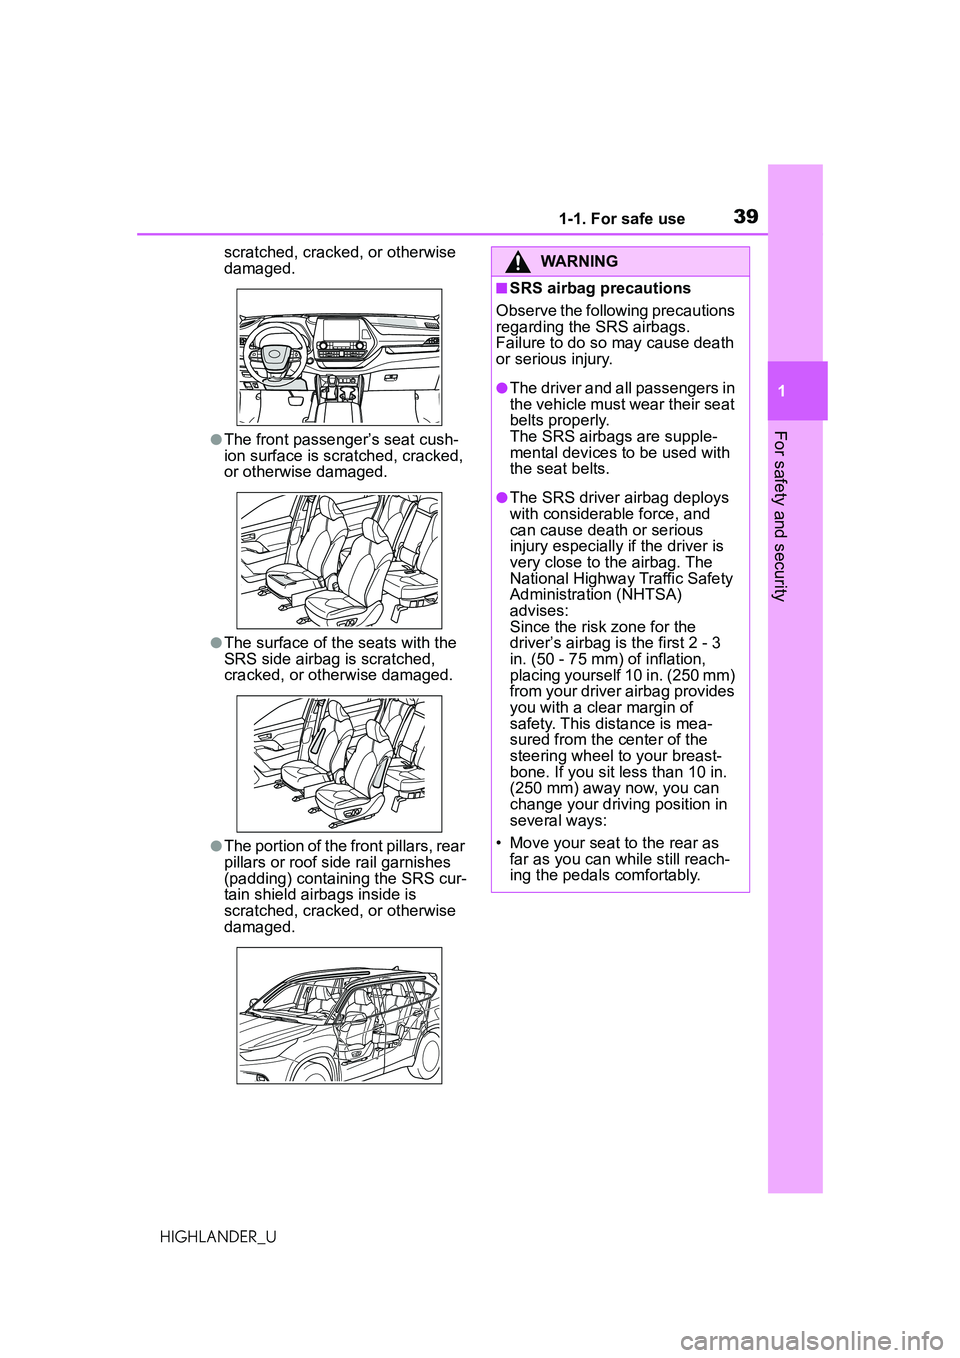 TOYOTA HIGHLANDER 2021  Owners Manual (in English) 391-1. For safe use
1
For safety and security
HIGHLANDER_Uscratched, cracked, or otherwise 
damaged.
●The front passenger’s seat cush-
ion surface is scratched, cracked, 
or otherwise damaged.
●